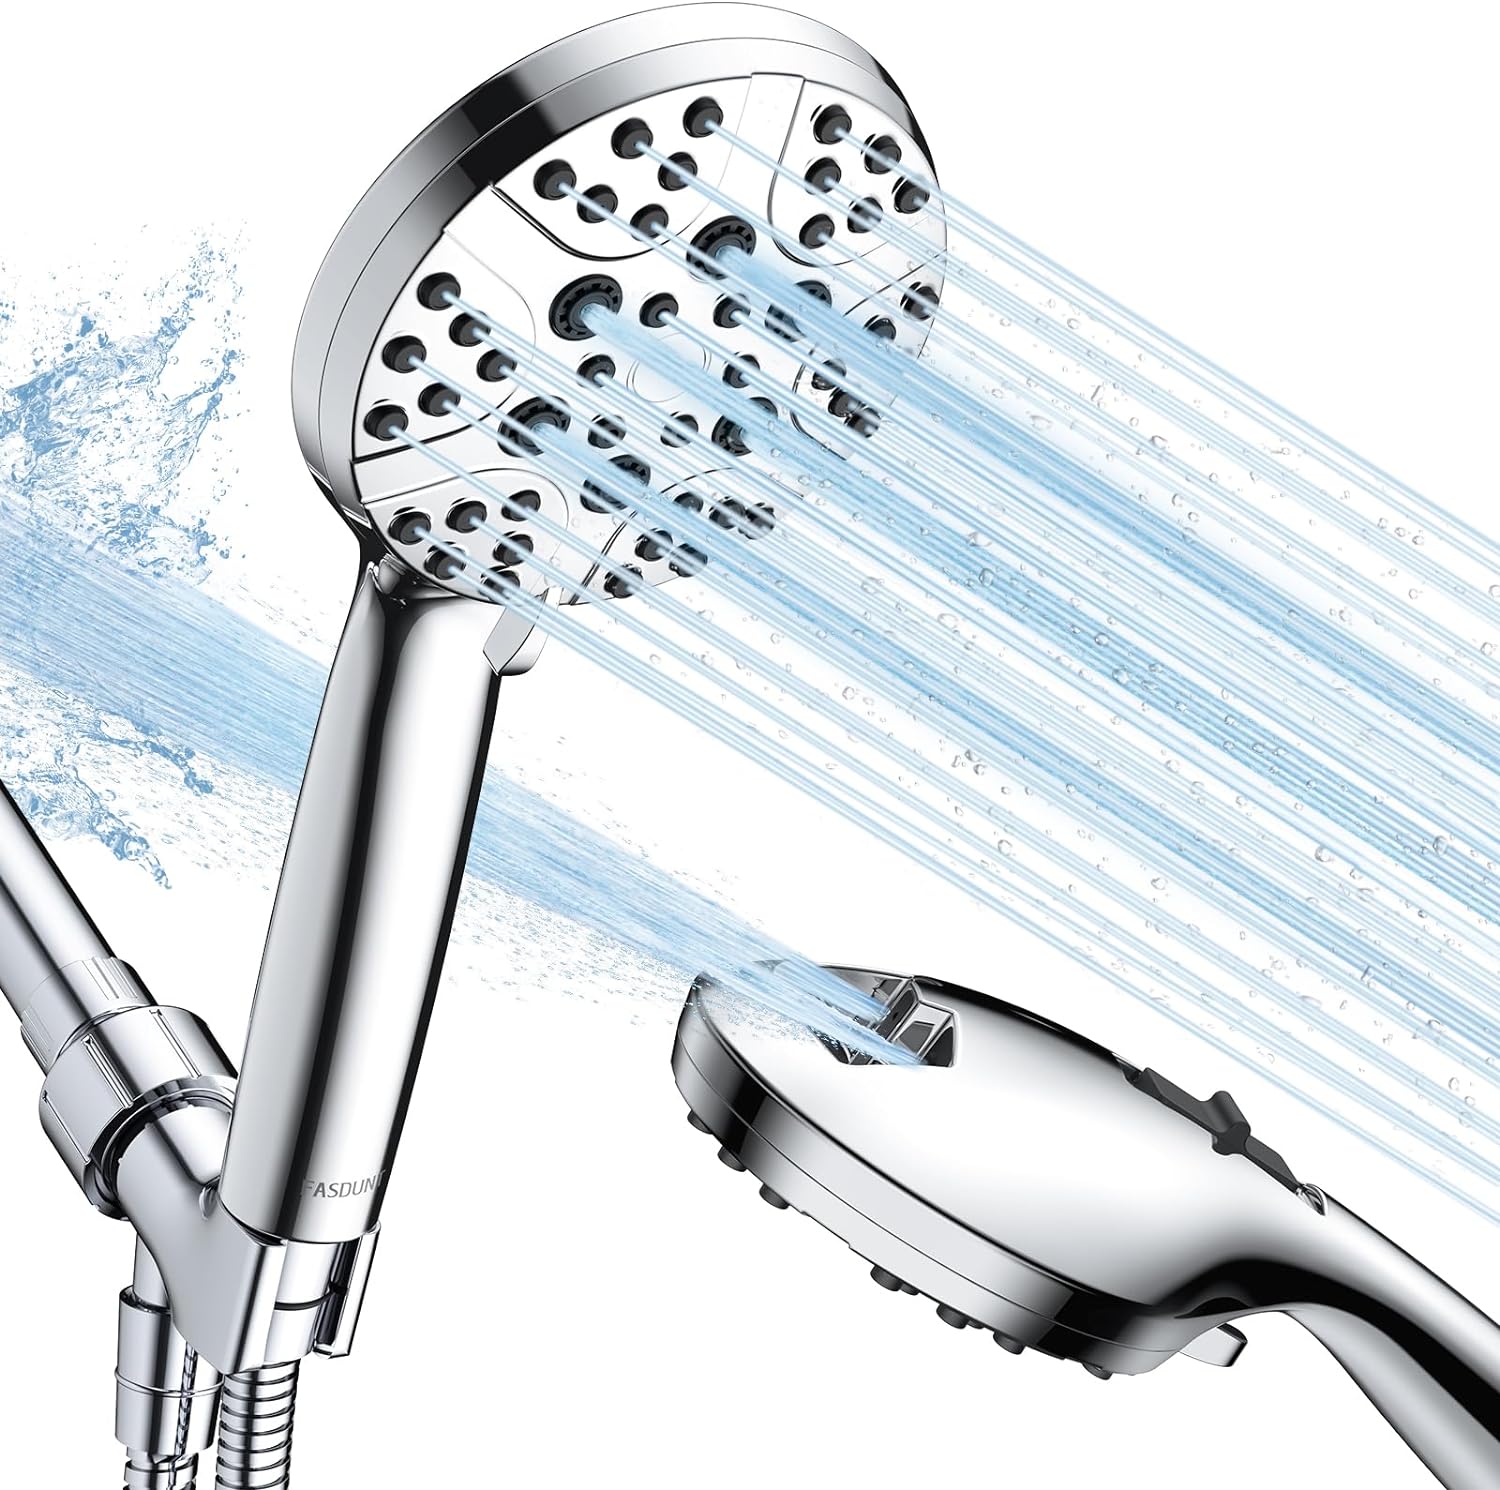 High Pressure Shower Head with Handheld, 8-mode Shower Heads with 80 Extra Long Stainless Steel Hose & Adjustable Bracket, Built-in Power Wash to Clean Tub, Tile & Pets - Chrome